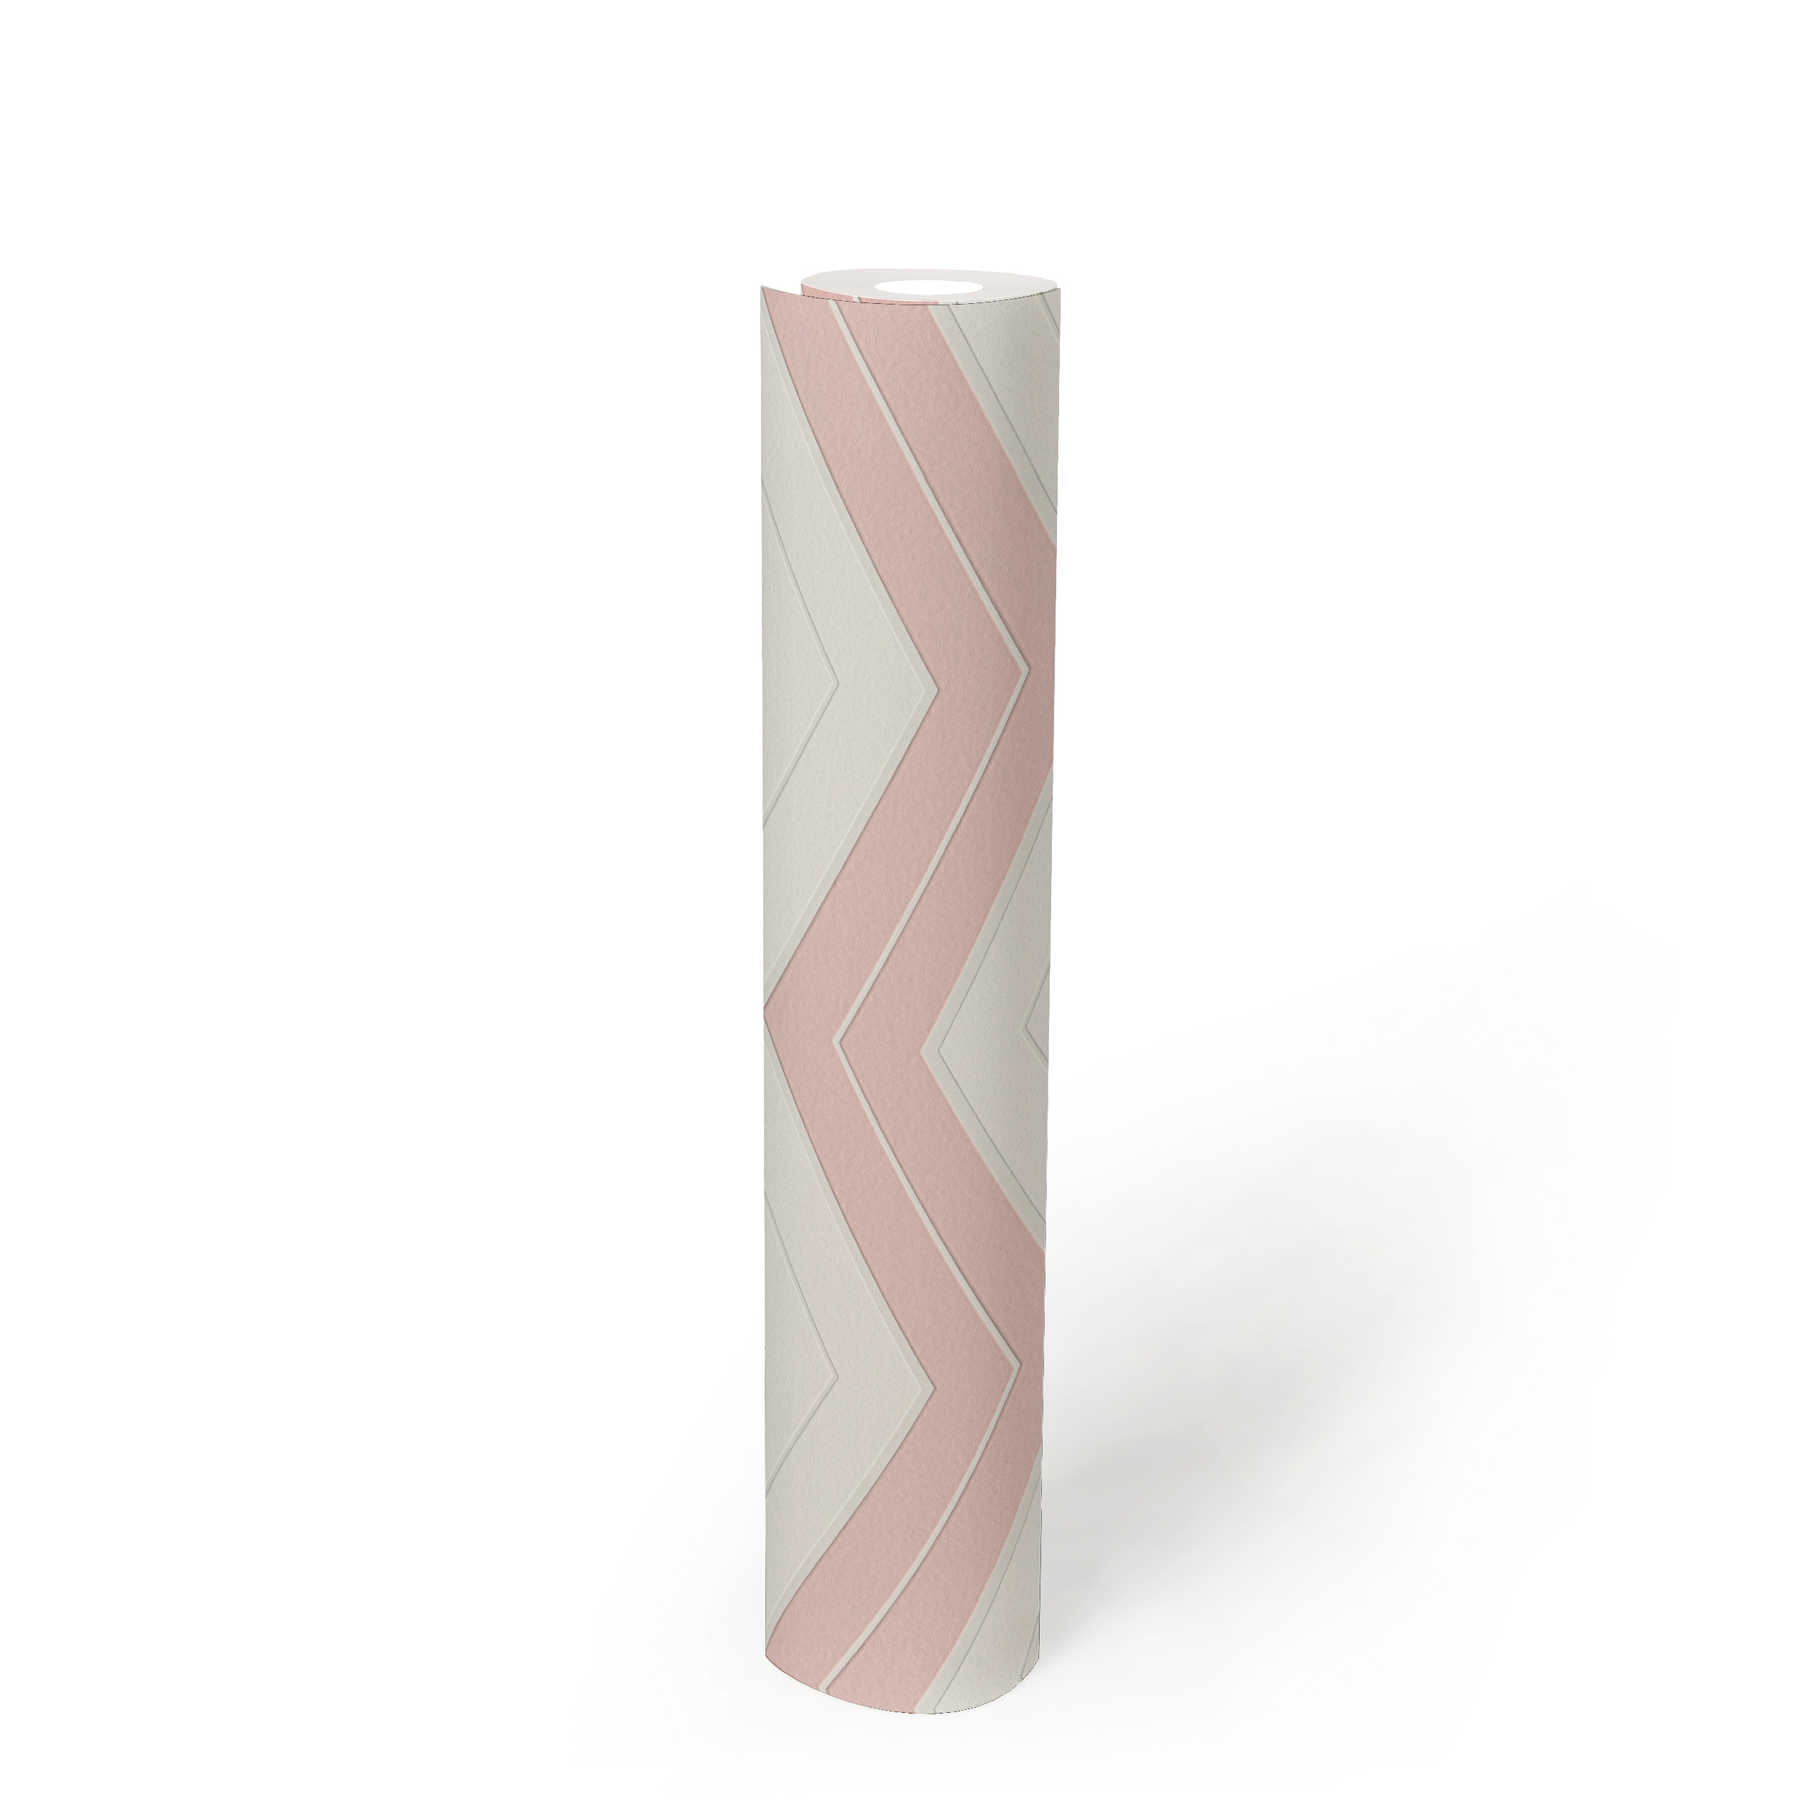             Wallpaper with zigzag lines horizontal striped - pink, white
        